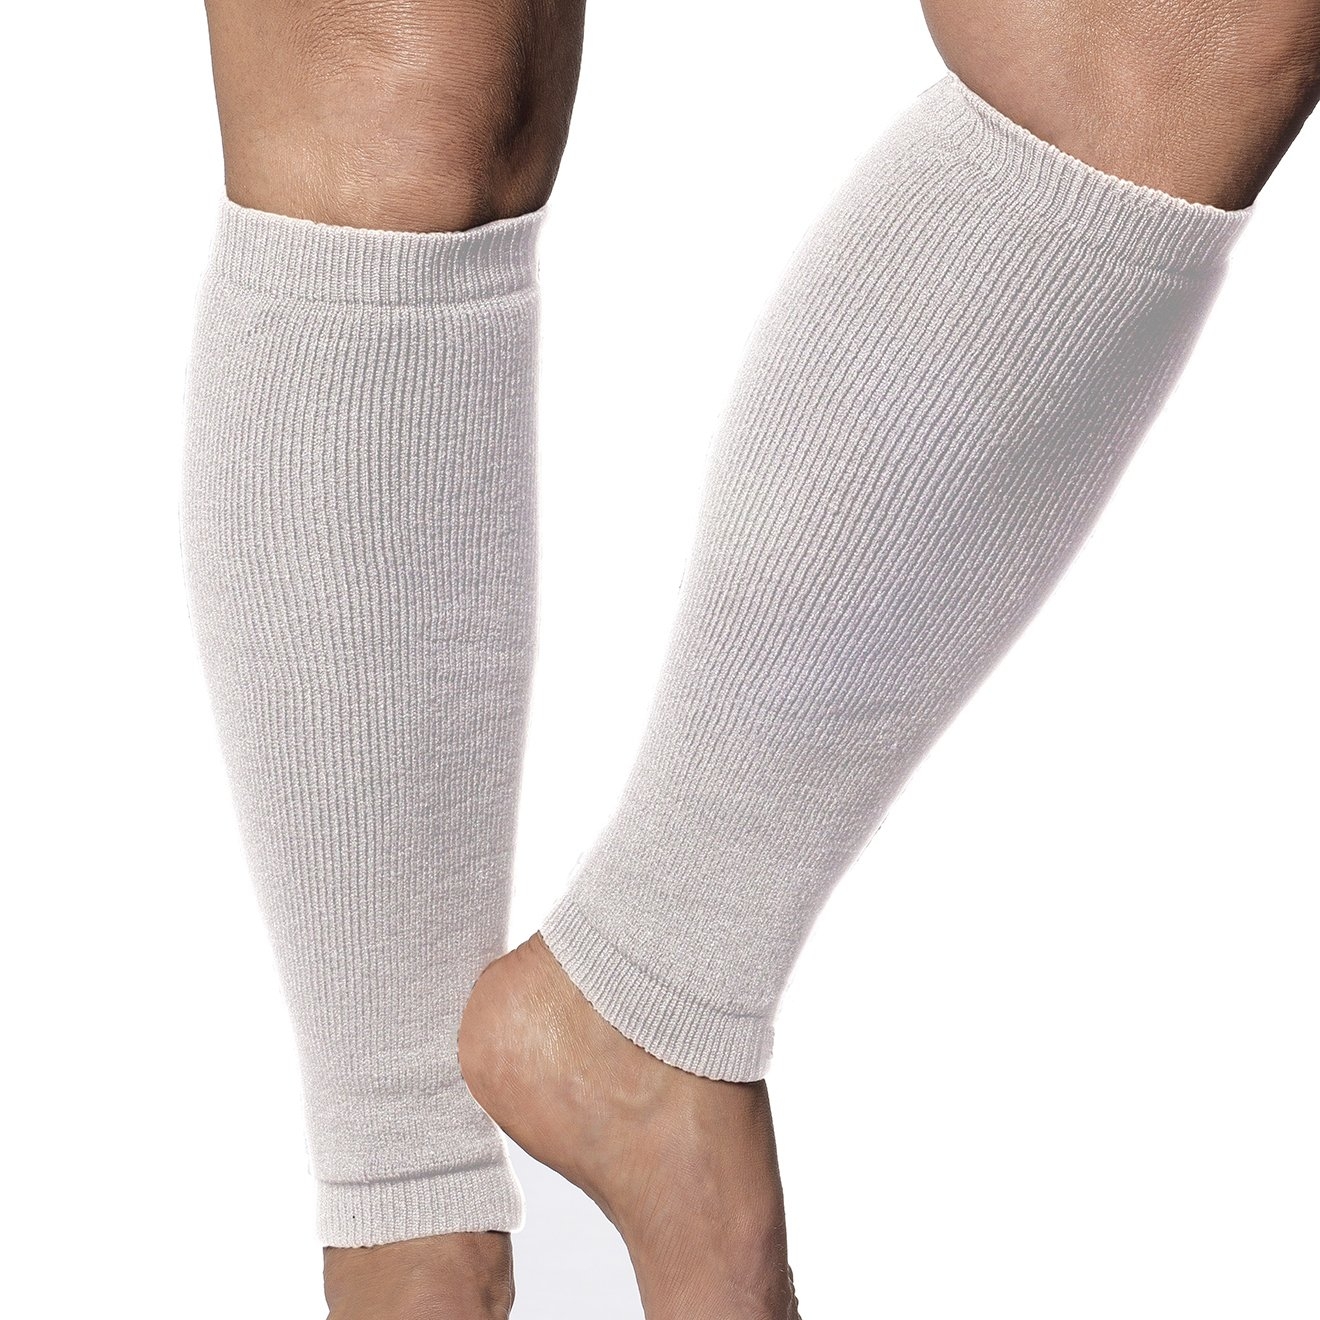 Leg Sleeves – Light Weight – Frail Skin Protectors to stop leg damage White – Limb Keepers